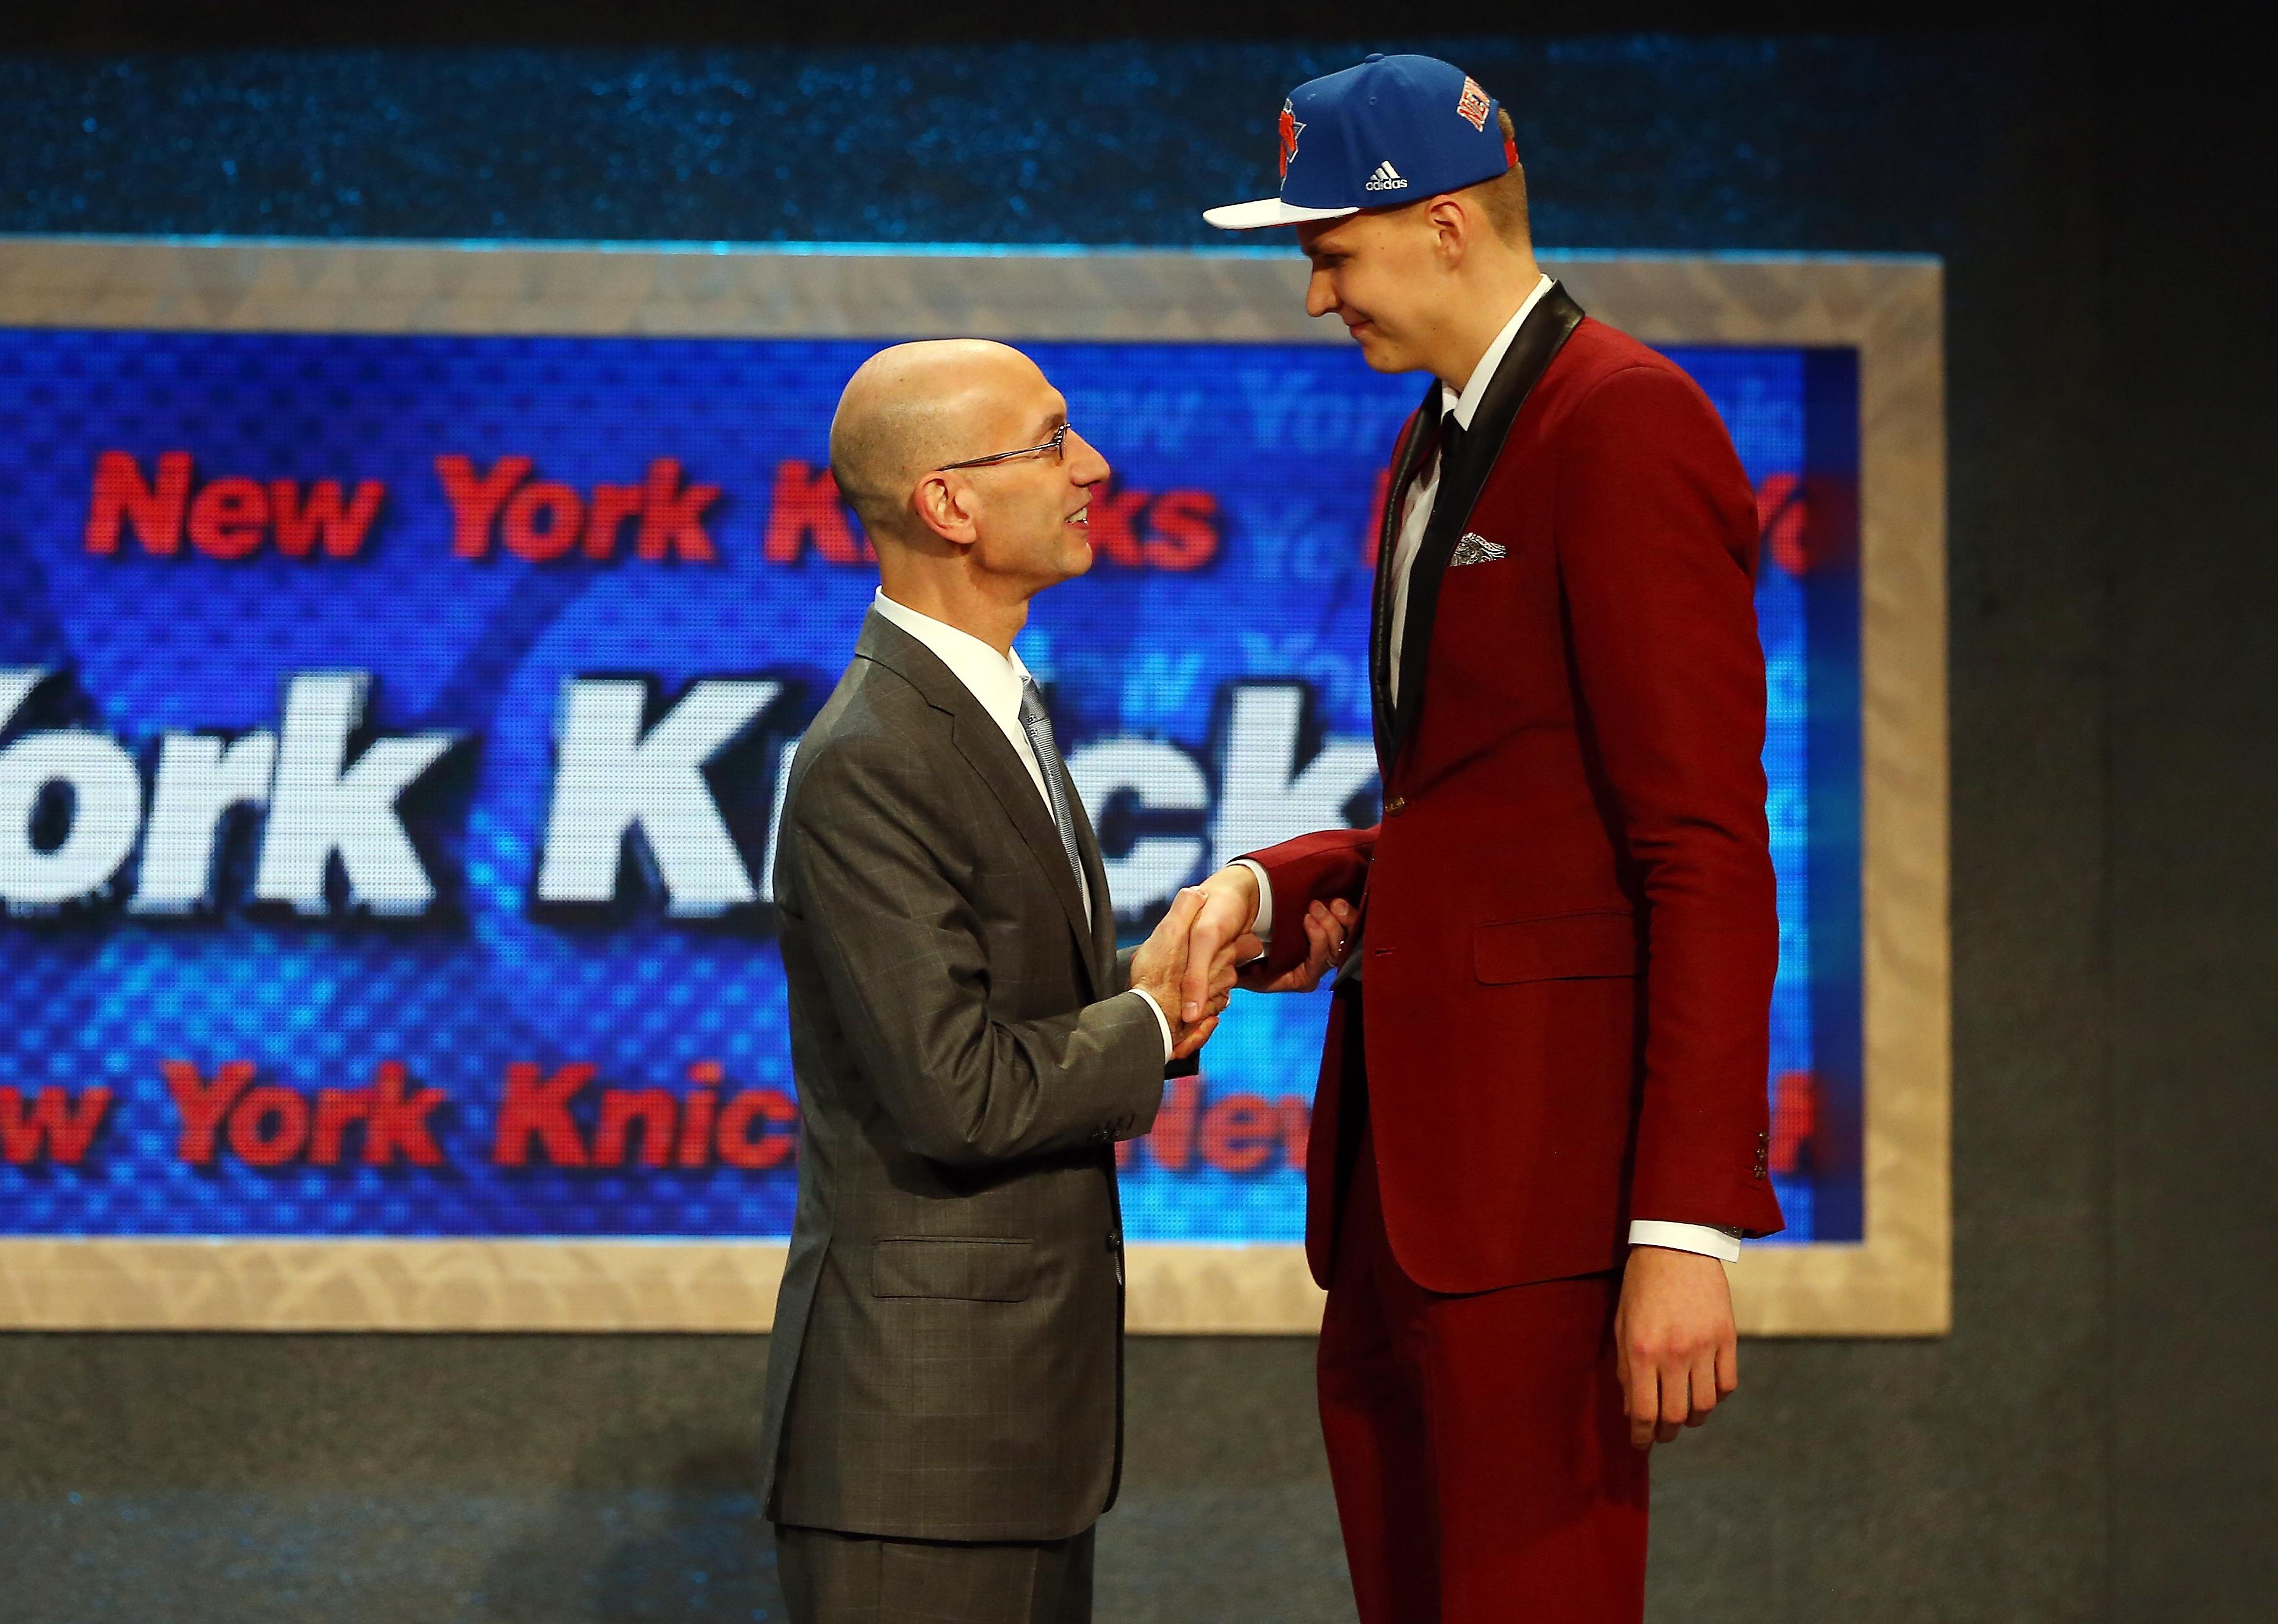 Kristaps Porzingis meets with Commissioner Adam Silver after being drafted.